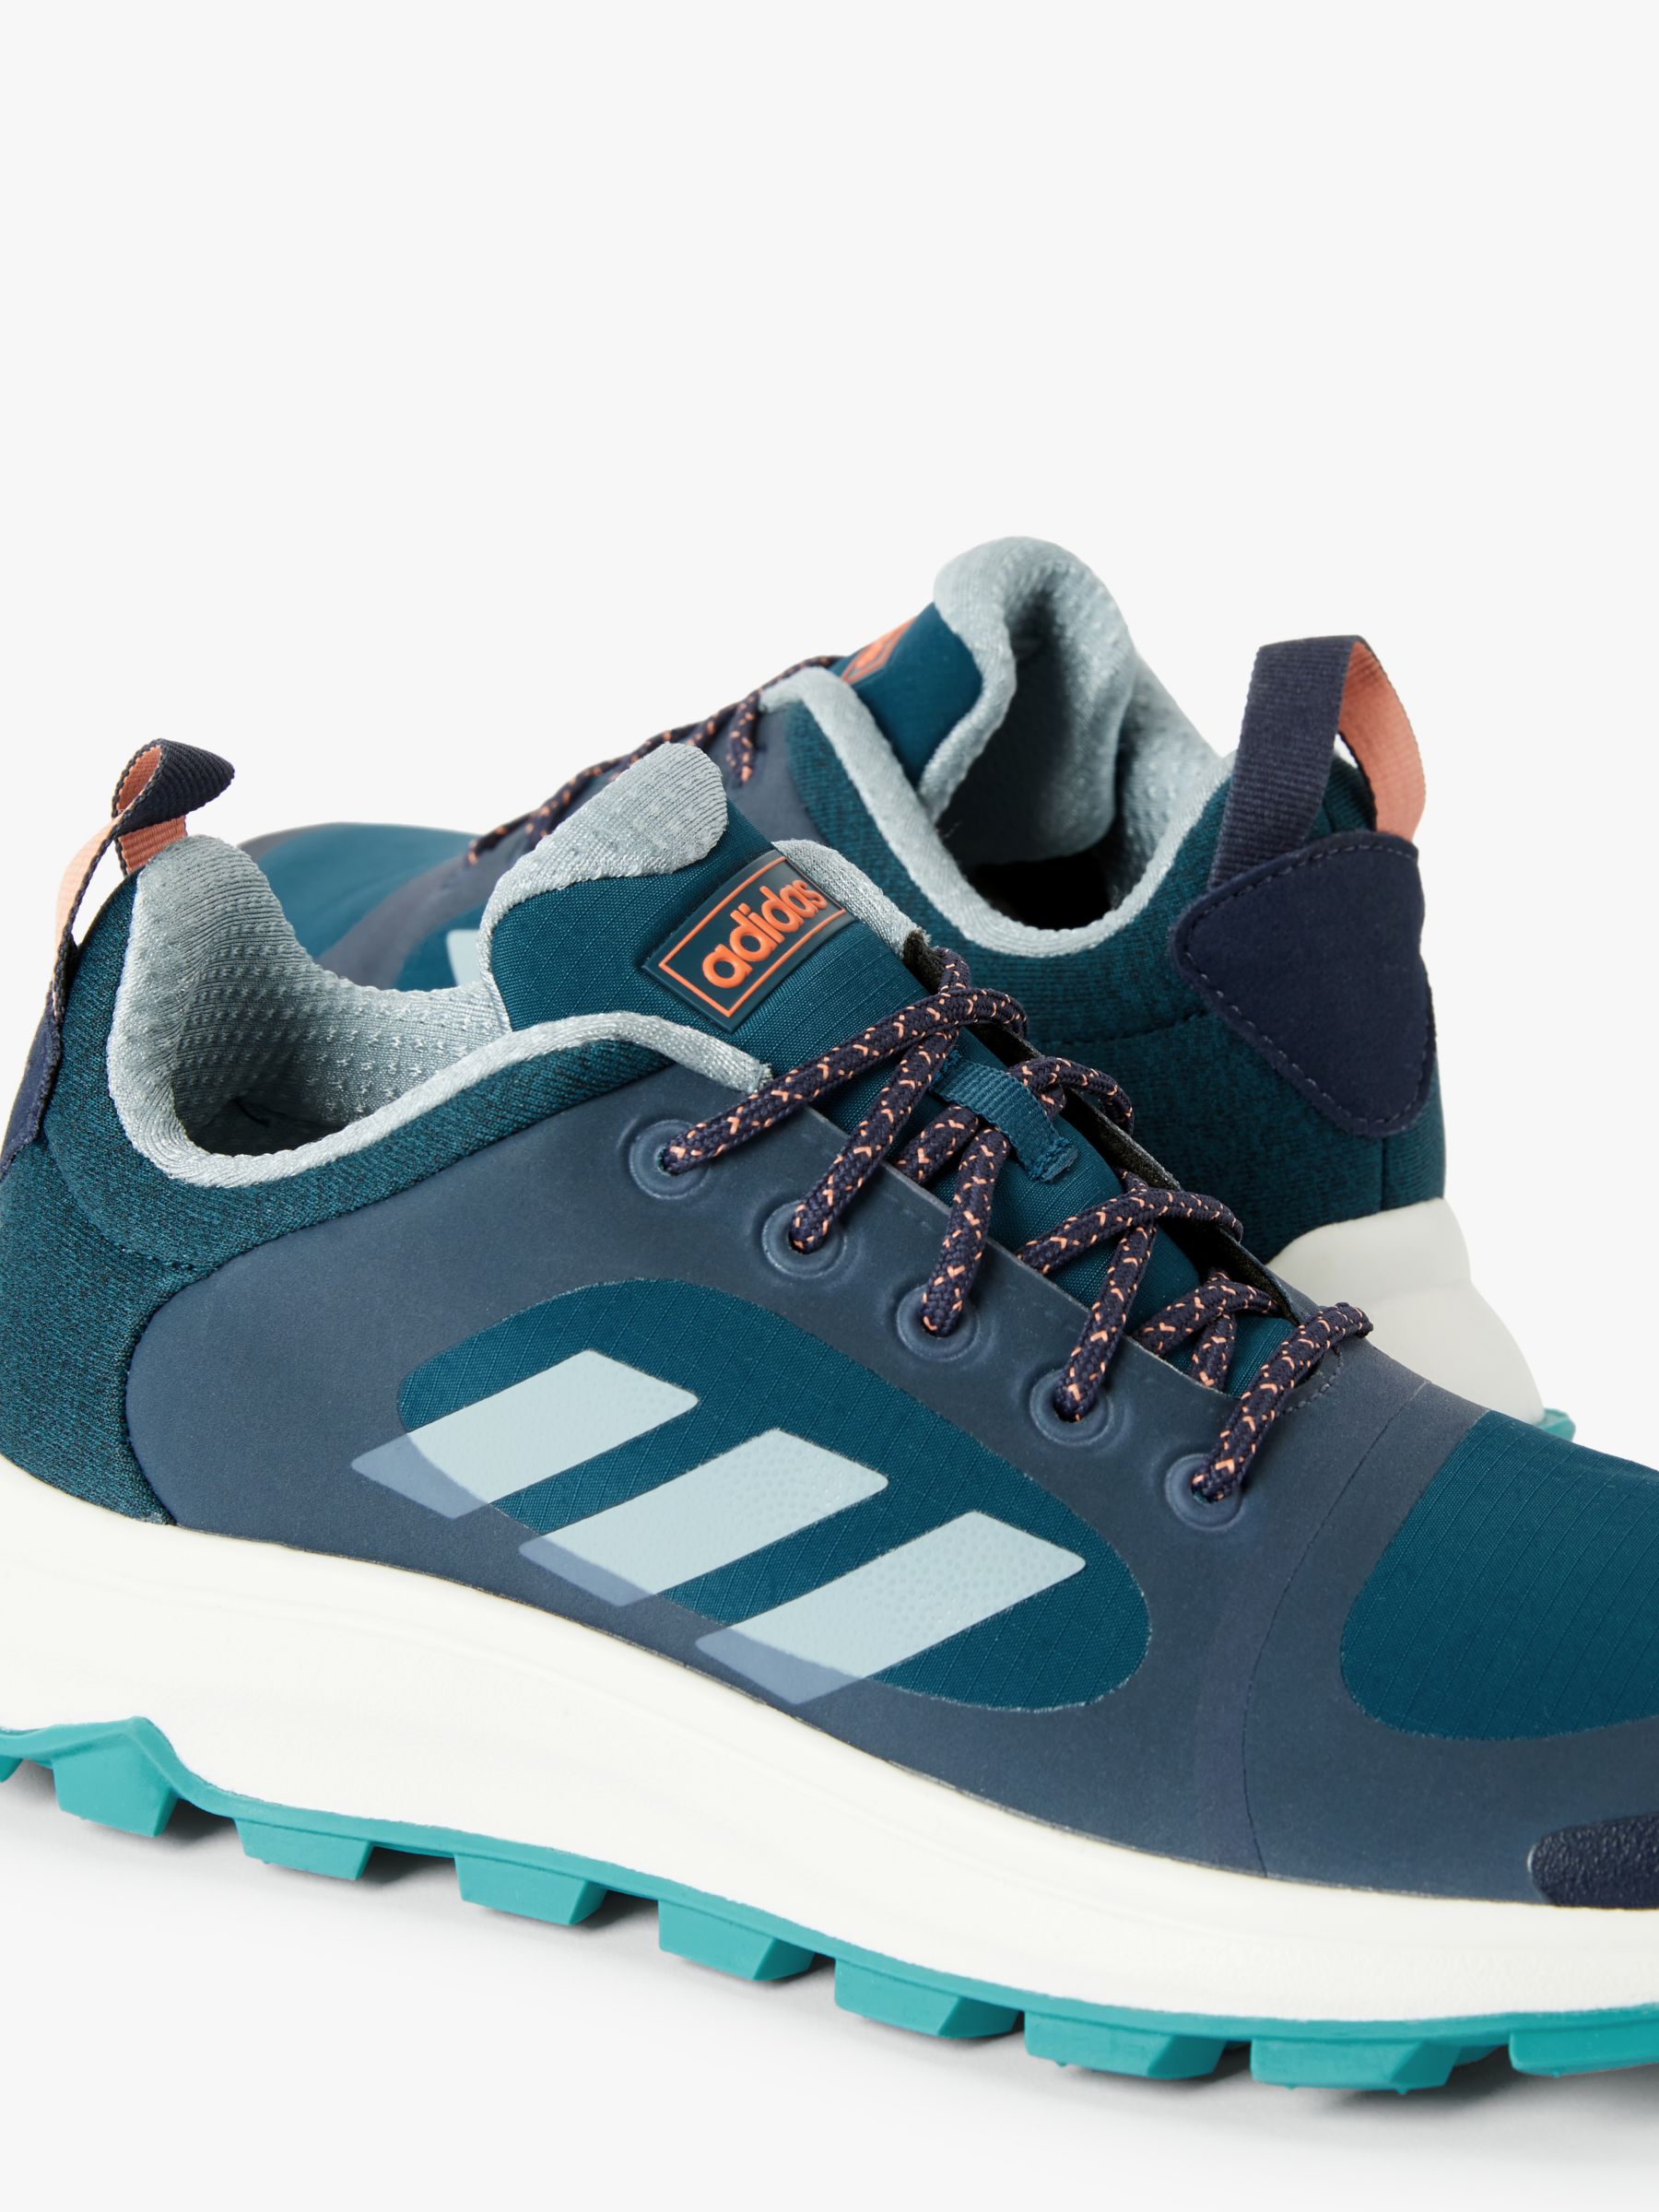 womens teal adidas shoes